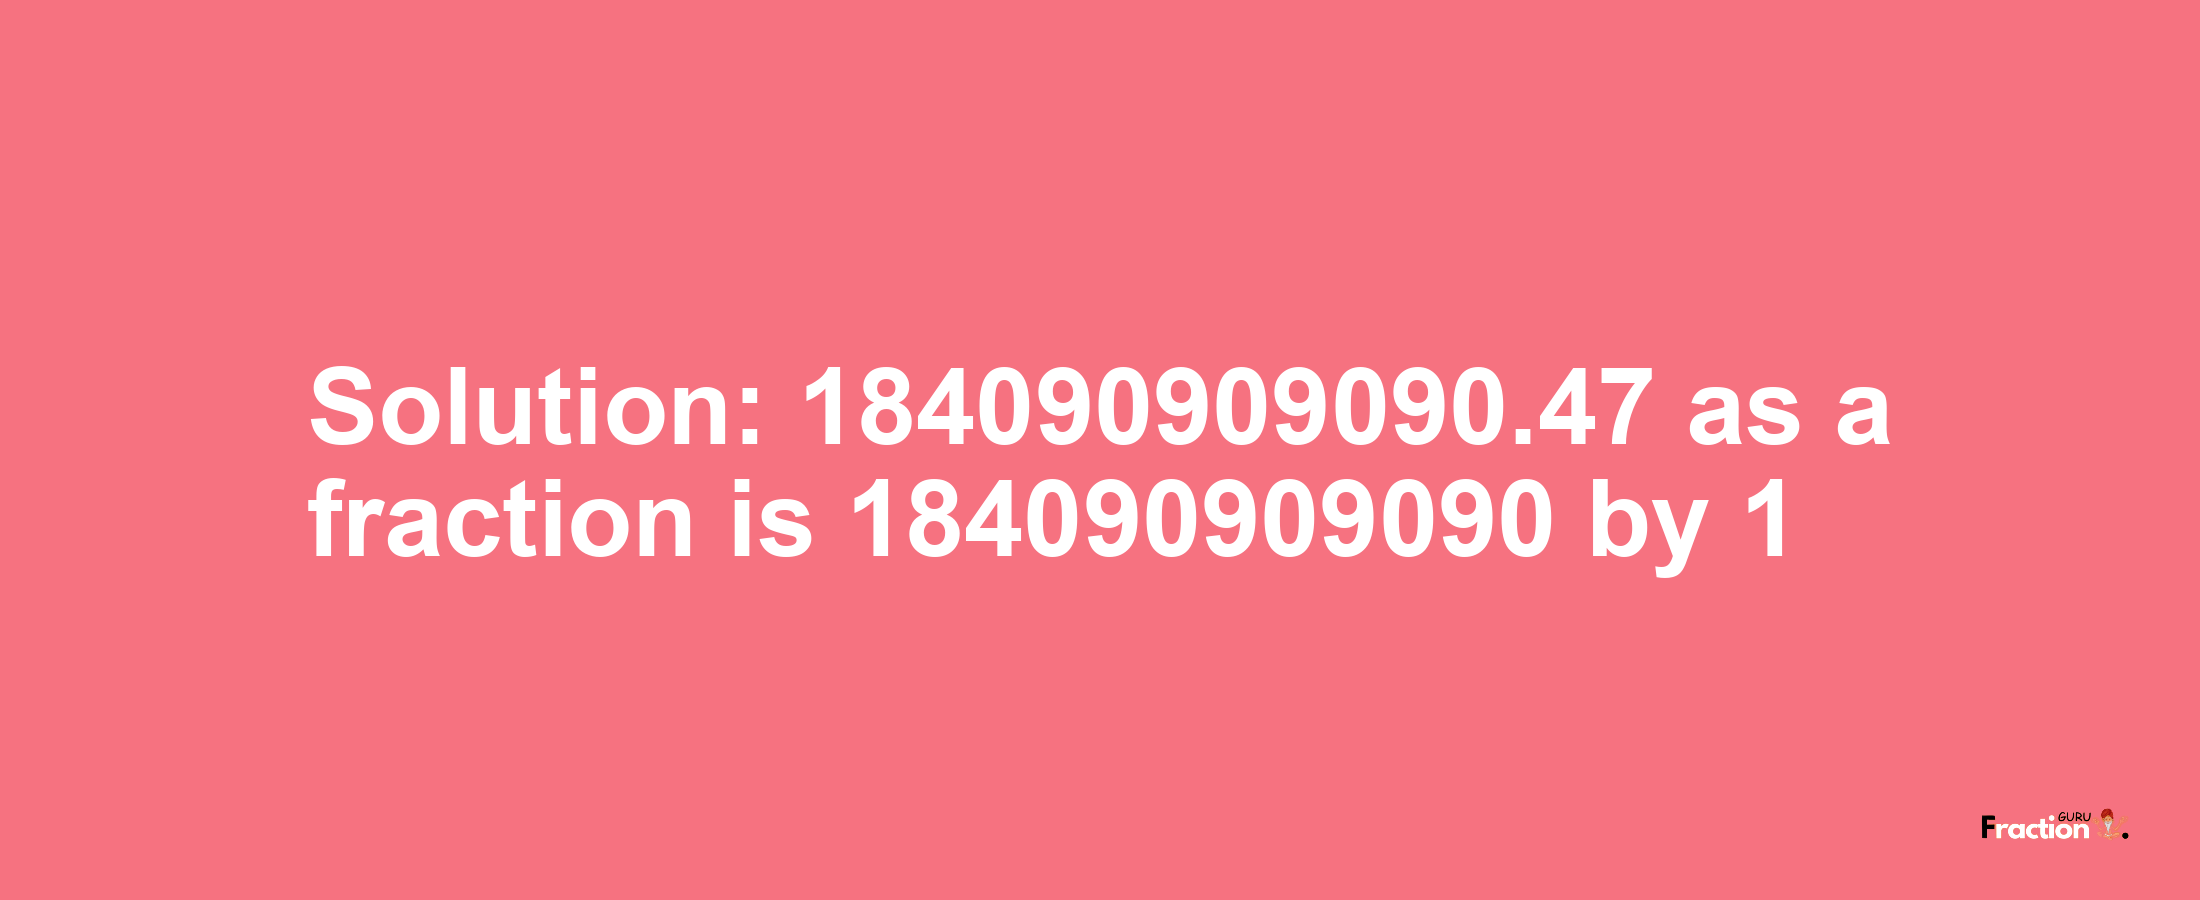 Solution:184090909090.47 as a fraction is 184090909090/1